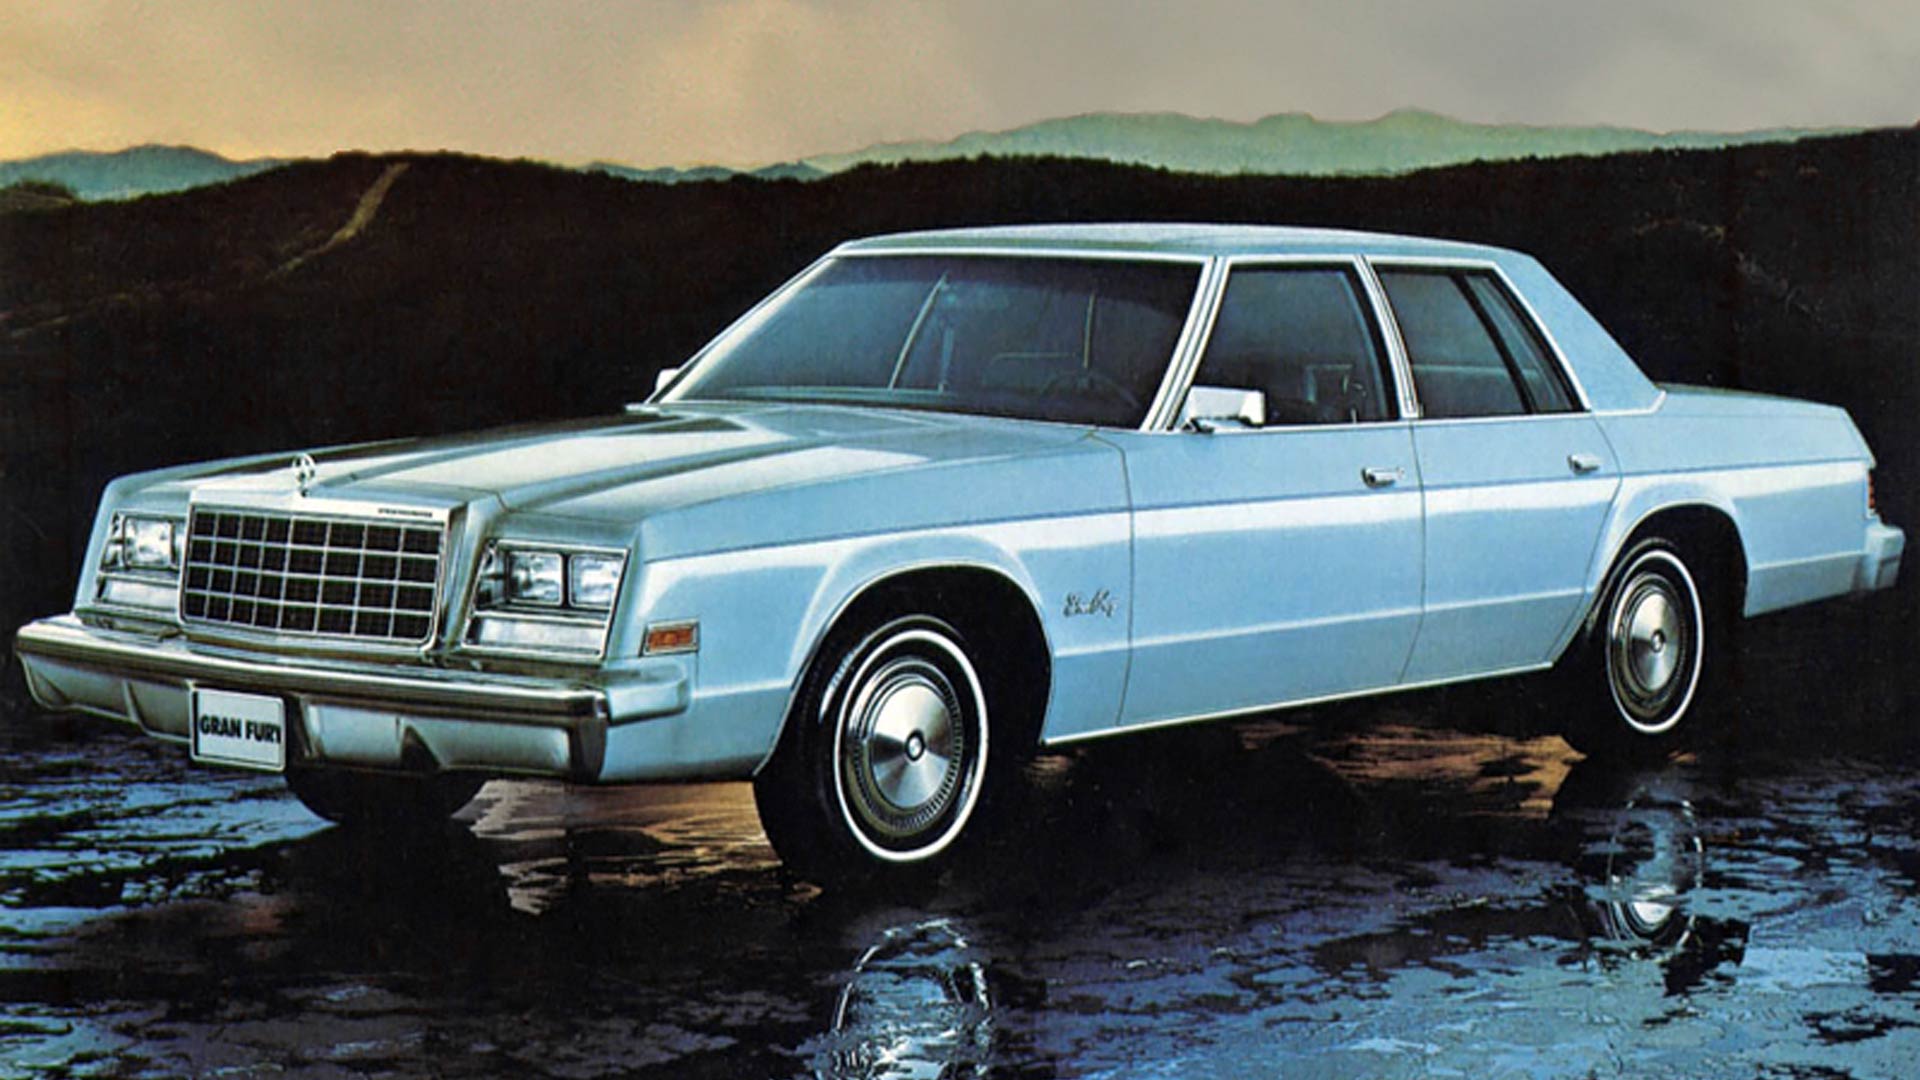 1980 Plymouth Gran Fury – 221.5 inches